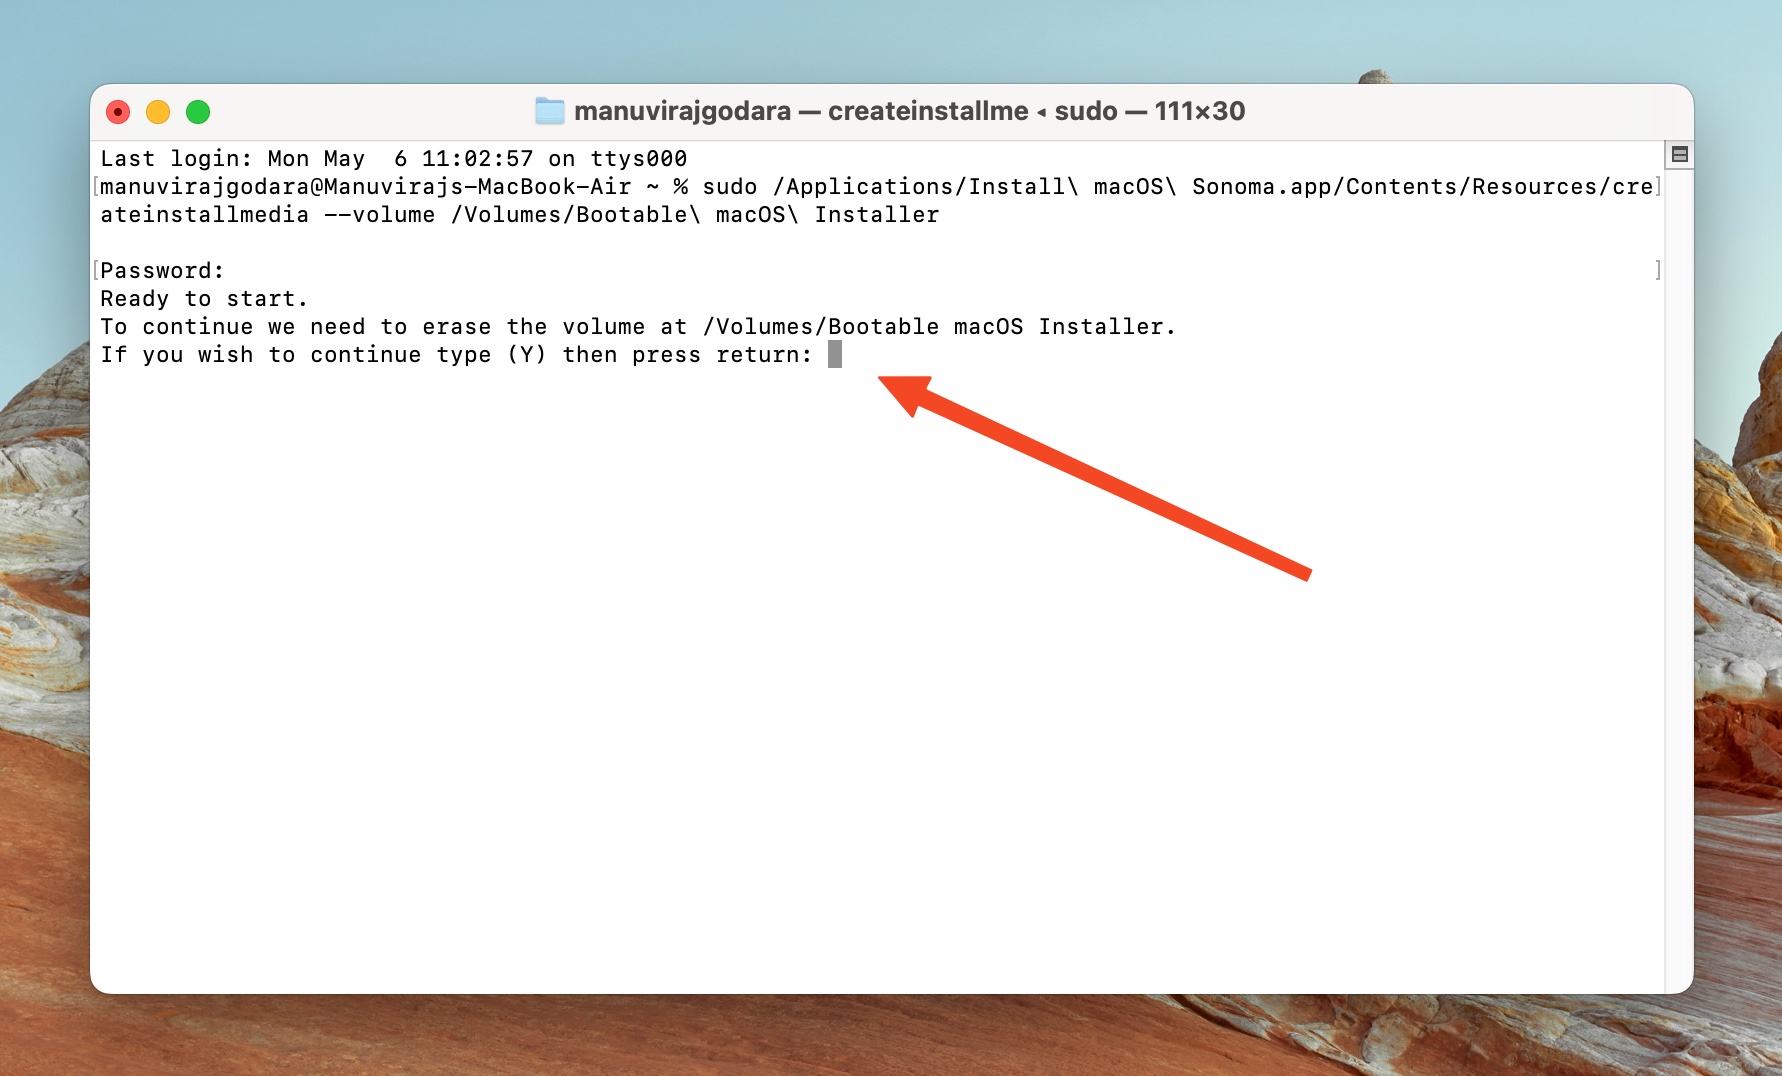 Terminal window on a Mac showing a command to create a bootable macOS installer, with a prompt asking for confirmation to erase the volume.